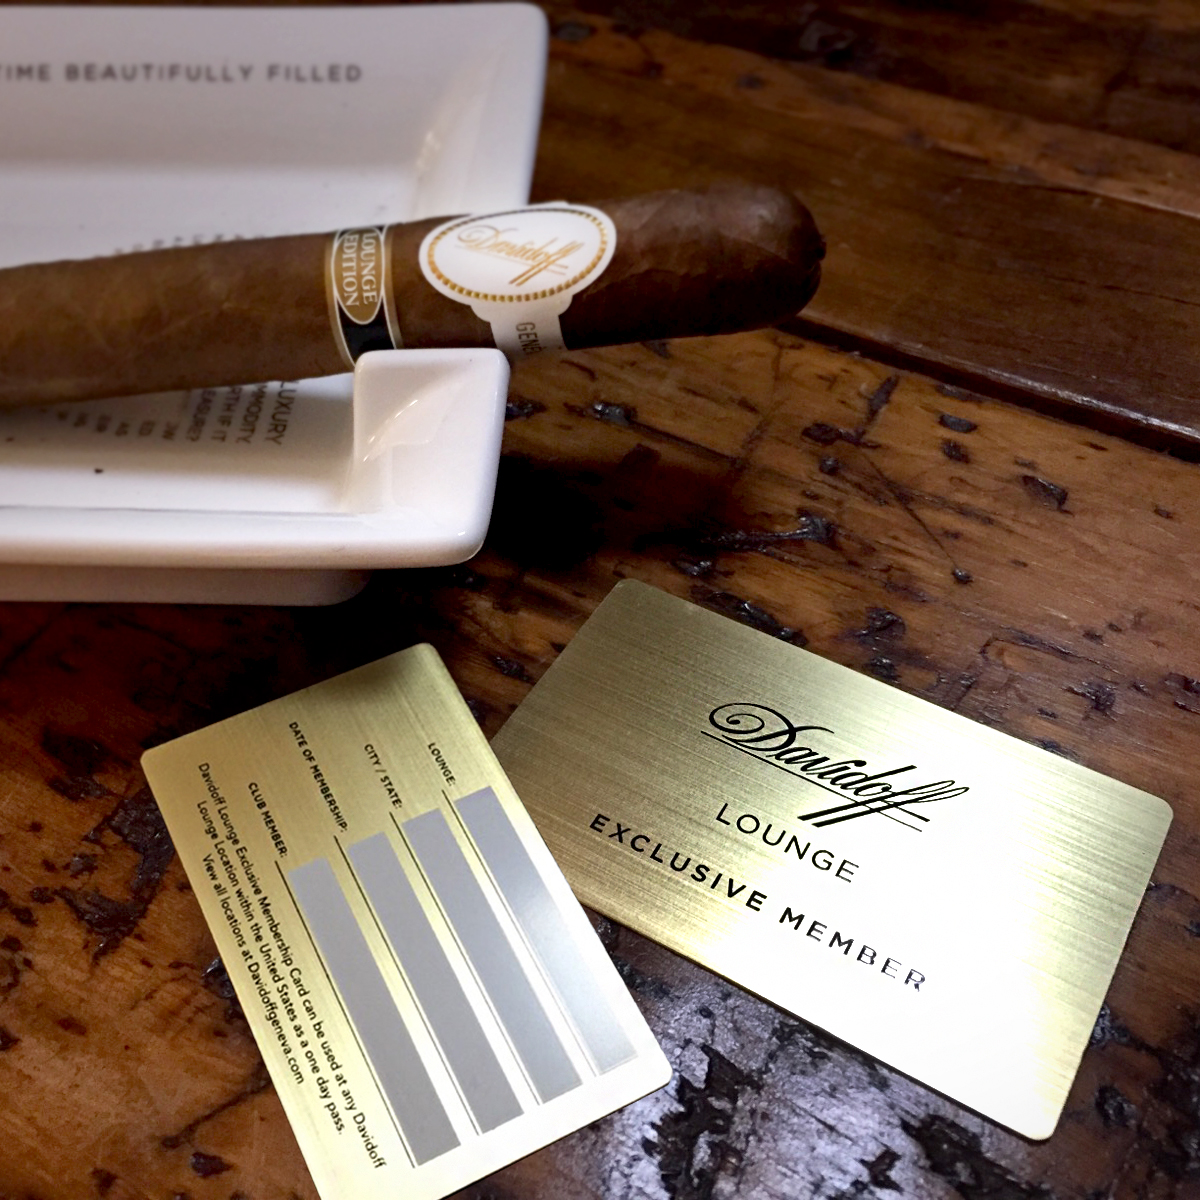   Find your escape   at the Tobacco Shop of Ridgewood and Davidoff Lounge   Learn more  